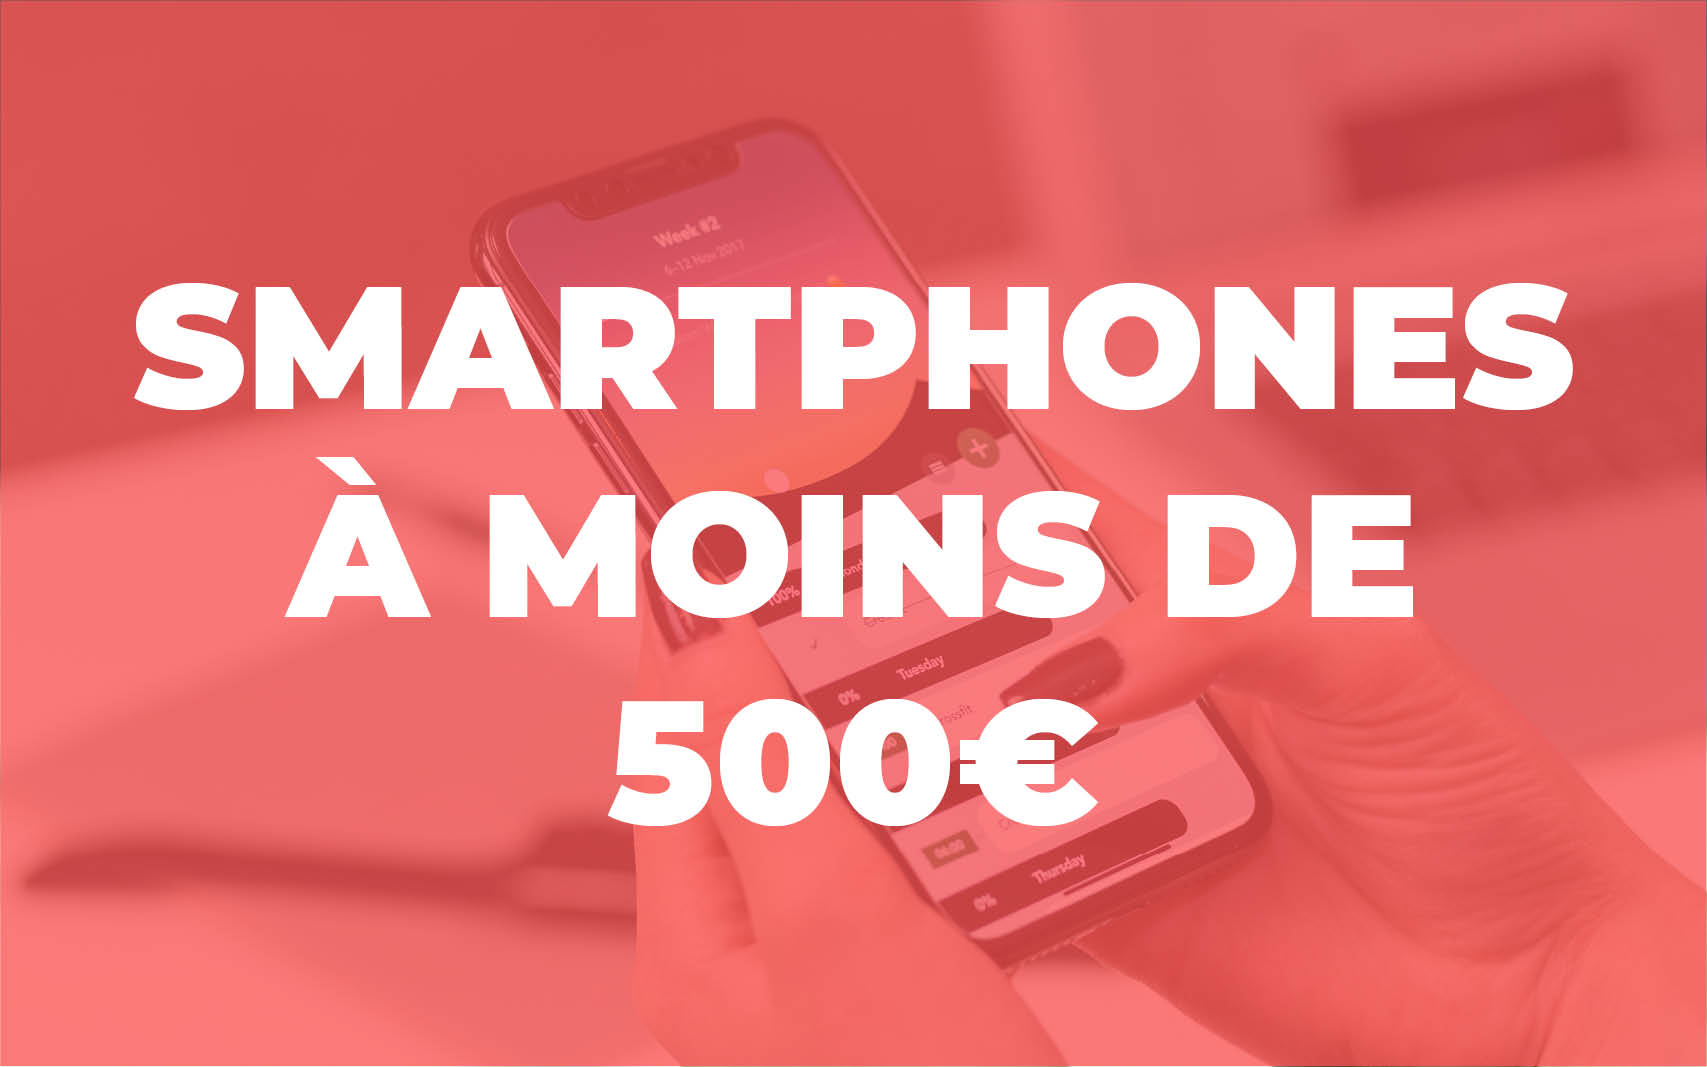 guide_achat_smartphone_moins_500_euros